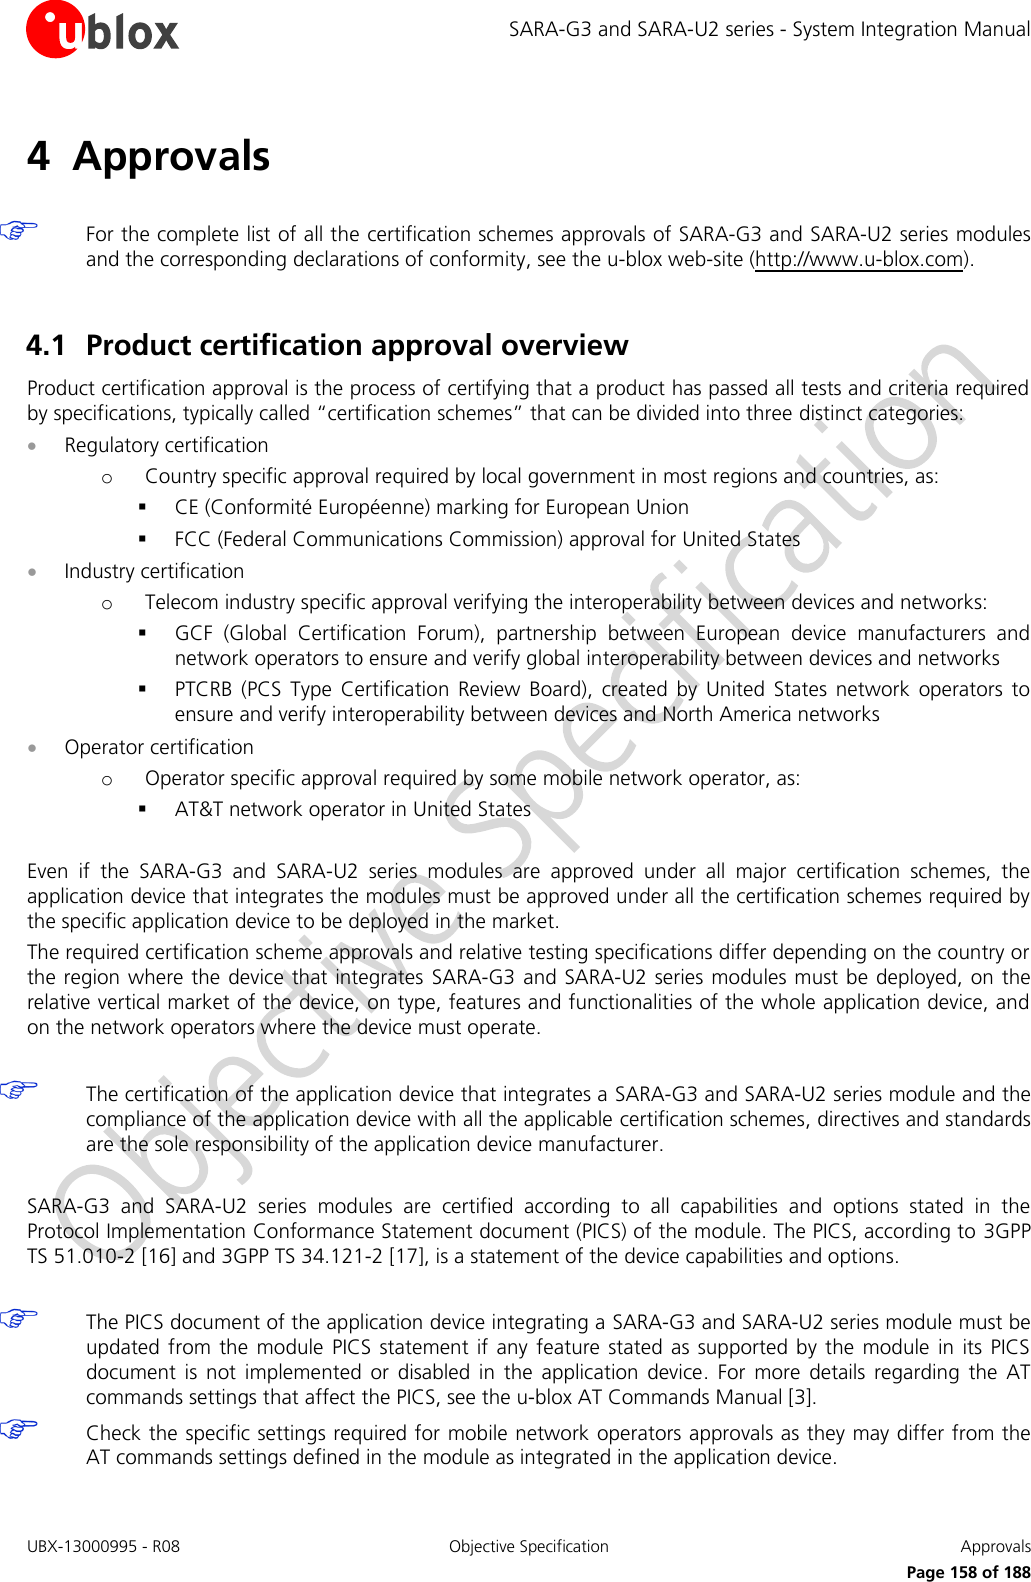 SARA-G3 and SARA-U2 series - System Integration Manual UBX-13000995 - R08  Objective Specification  Approvals     Page 158 of 188 4 Approvals   For the complete list of all the certification schemes approvals of SARA-G3 and SARA-U2 series modules and the corresponding declarations of conformity, see the u-blox web-site (http://www.u-blox.com).  4.1 Product certification approval overview Product certification approval is the process of certifying that a product has passed all tests and criteria required by specifications, typically called “certification schemes” that can be divided into three distinct categories:  Regulatory certification o Country specific approval required by local government in most regions and countries, as:  CE (Conformité Européenne) marking for European Union  FCC (Federal Communications Commission) approval for United States  Industry certification o Telecom industry specific approval verifying the interoperability between devices and networks:  GCF  (Global  Certification  Forum),  partnership  between  European  device  manufacturers  and network operators to ensure and verify global interoperability between devices and networks  PTCRB  (PCS  Type  Certification  Review  Board),  created  by  United  States  network  operators  to ensure and verify interoperability between devices and North America networks  Operator certification o Operator specific approval required by some mobile network operator, as:  AT&amp;T network operator in United States  Even  if  the  SARA-G3  and  SARA-U2  series  modules  are  approved  under  all  major  certification  schemes,  the application device that integrates the modules must be approved under all the certification schemes required by the specific application device to be deployed in the market. The required certification scheme approvals and relative testing specifications differ depending on the country or the region where the  device that integrates  SARA-G3 and SARA-U2 series modules must be deployed, on the relative vertical market of the device, on type, features and functionalities of the whole application device, and on the network operators where the device must operate.   The certification of the application device that integrates a SARA-G3 and SARA-U2 series module and the compliance of the application device with all the applicable certification schemes, directives and standards are the sole responsibility of the application device manufacturer.  SARA-G3  and  SARA-U2  series  modules  are  certified  according  to  all  capabilities  and  options  stated  in  the Protocol Implementation Conformance Statement document (PICS) of the module. The PICS, according to 3GPP TS 51.010-2 [16] and 3GPP TS 34.121-2 [17], is a statement of the device capabilities and options.   The PICS document of the application device integrating a SARA-G3 and SARA-U2 series module must be updated  from the  module  PICS  statement  if any feature  stated  as supported by  the  module  in its PICS document  is  not  implemented  or  disabled  in  the  application  device.  For  more  details  regarding  the  AT commands settings that affect the PICS, see the u-blox AT Commands Manual [3].  Check the specific settings required for mobile network operators approvals as they may differ from the AT commands settings defined in the module as integrated in the application device.  